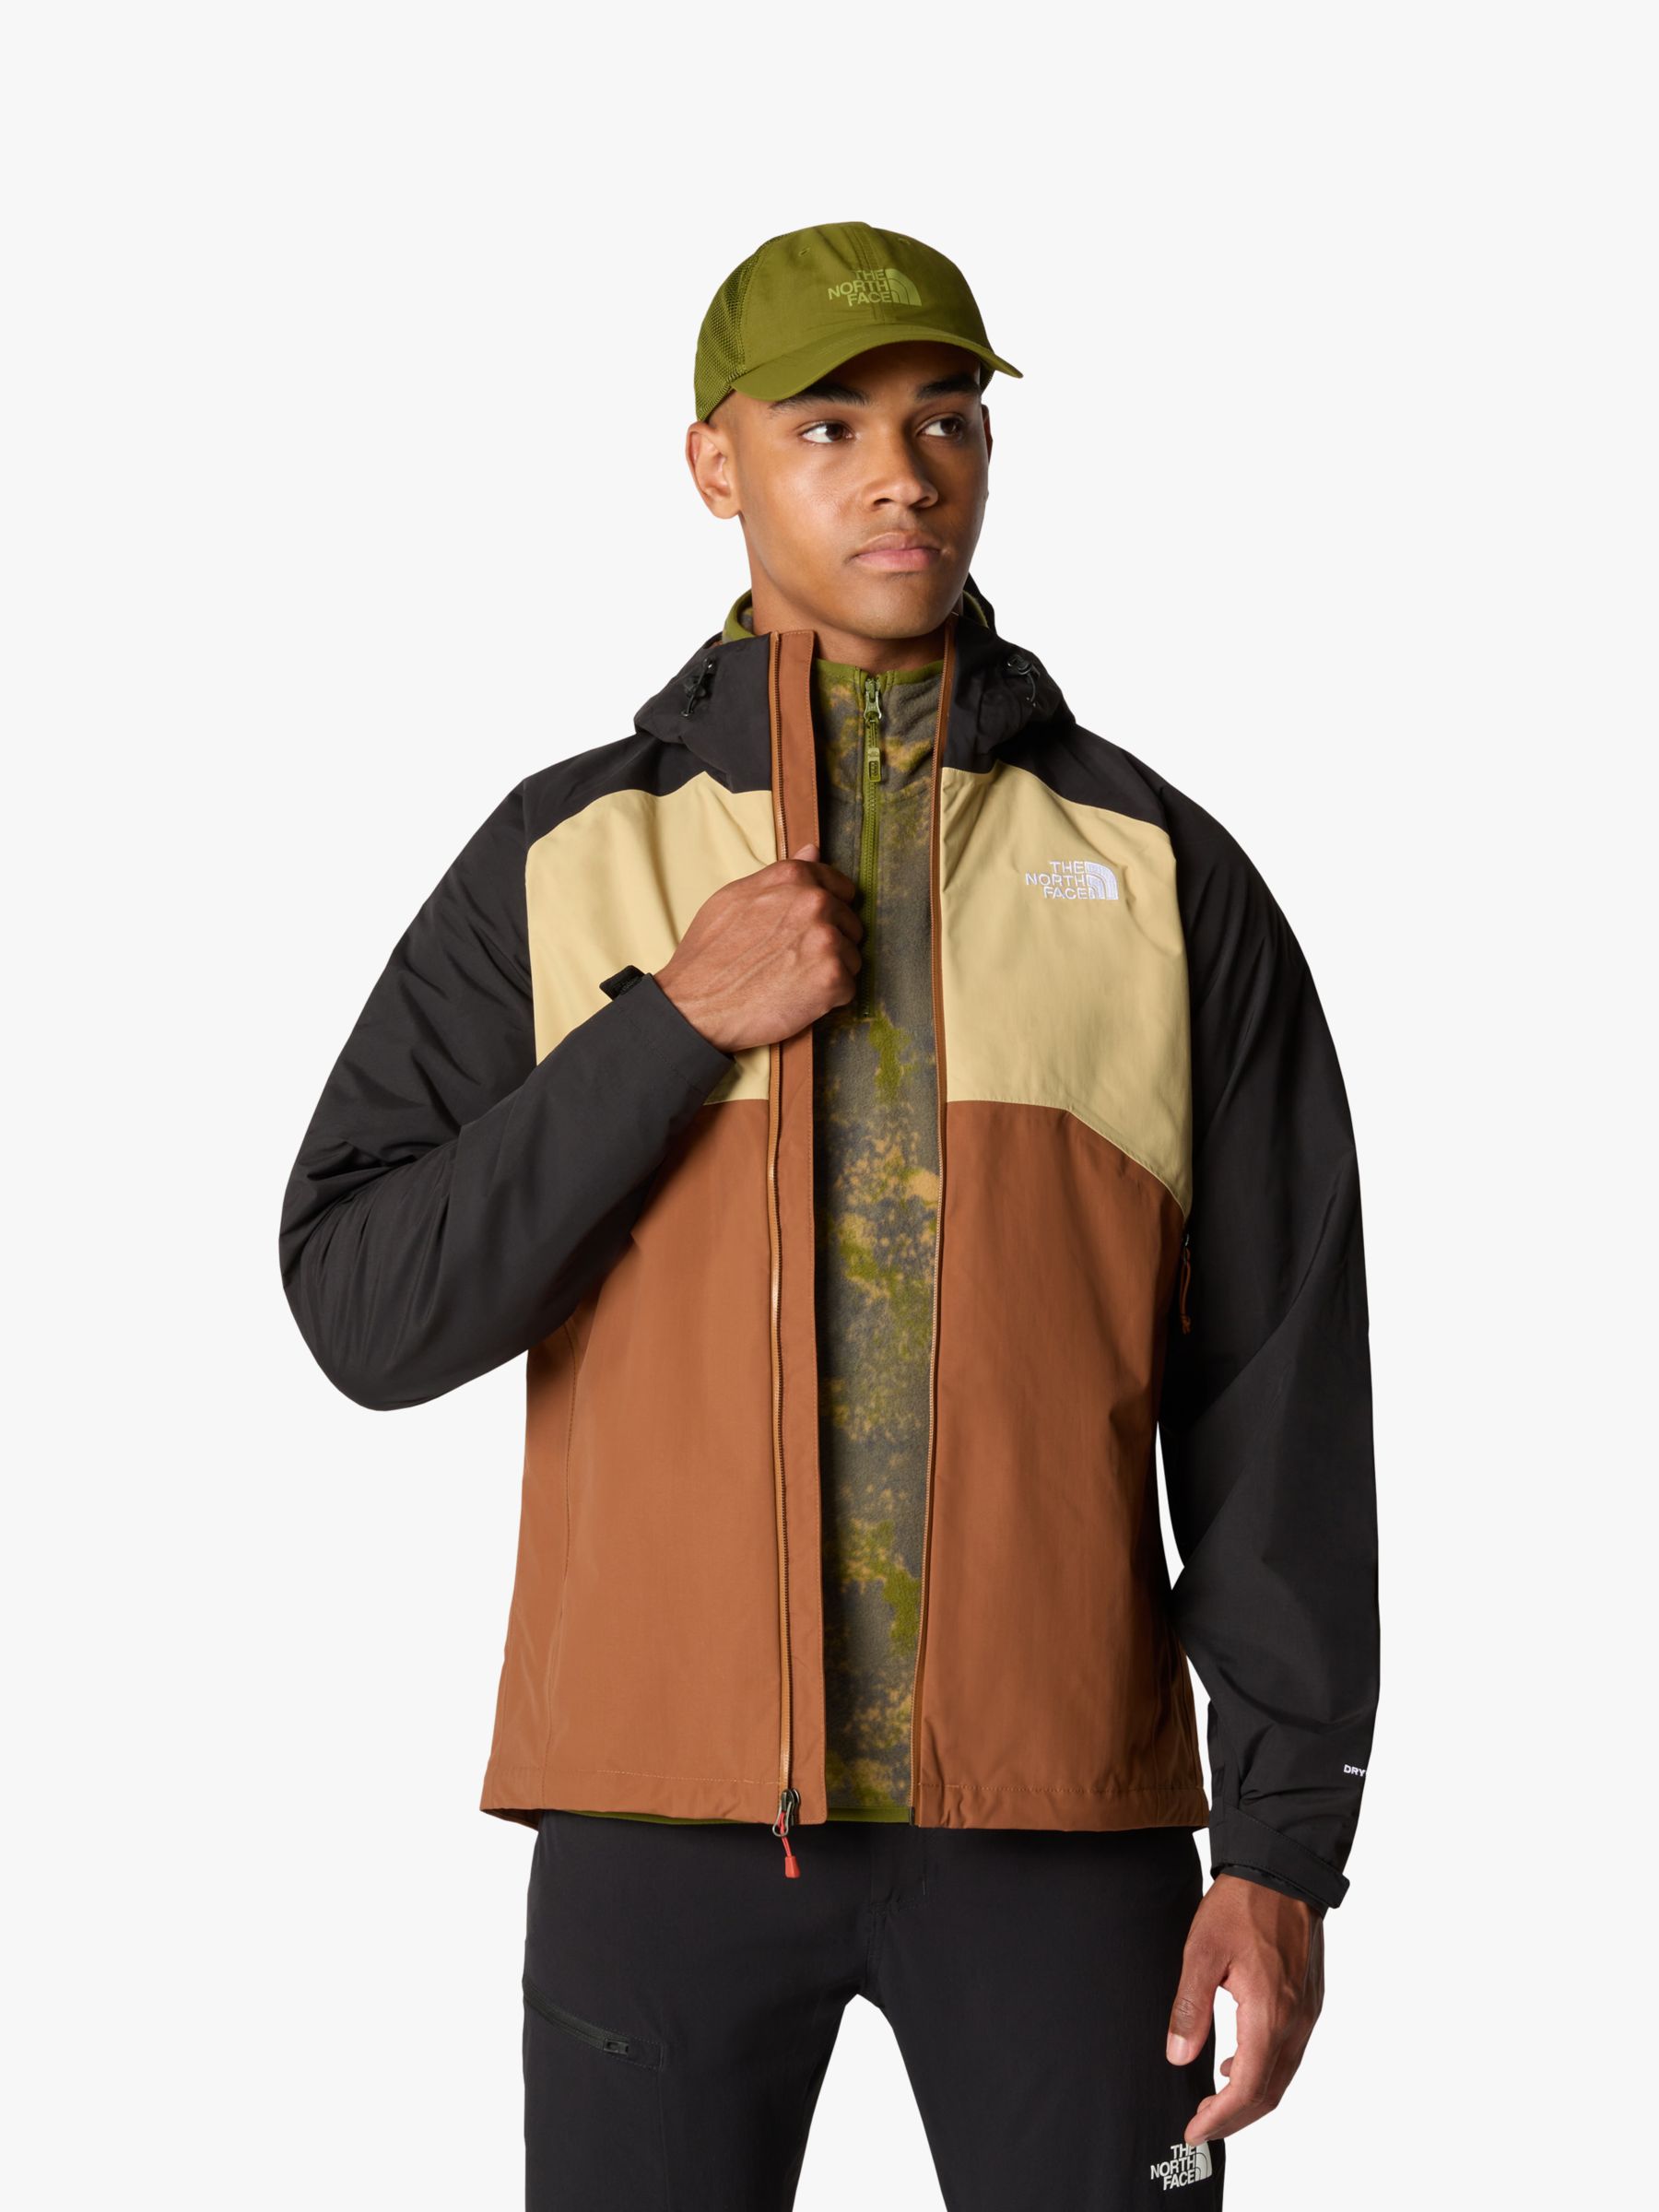 The North Face Men's Stratos Hooded Jacket,Brown/Khaki, XL